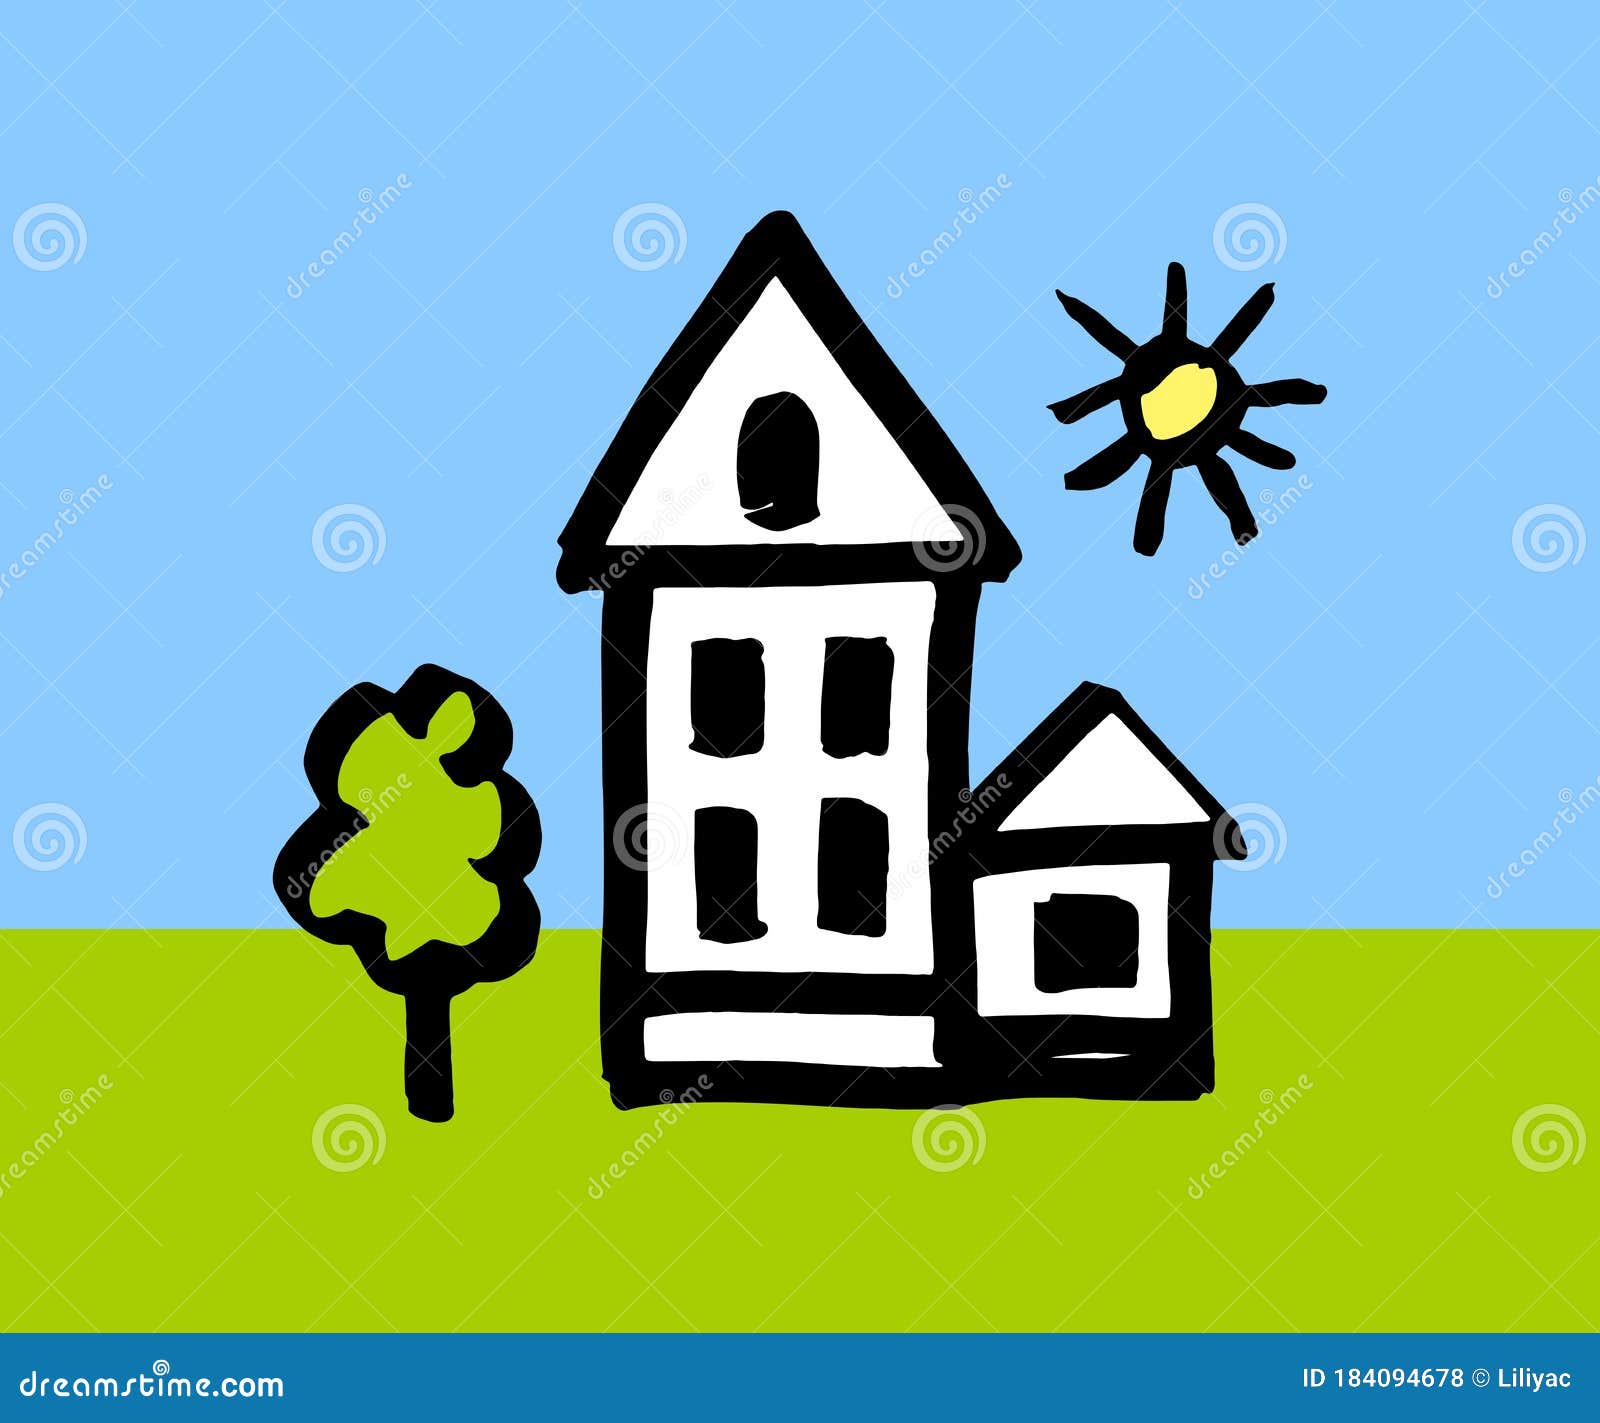 House Drawing PNG Transparent Images Free Download | Vector Files | Pngtree-saigonsouth.com.vn